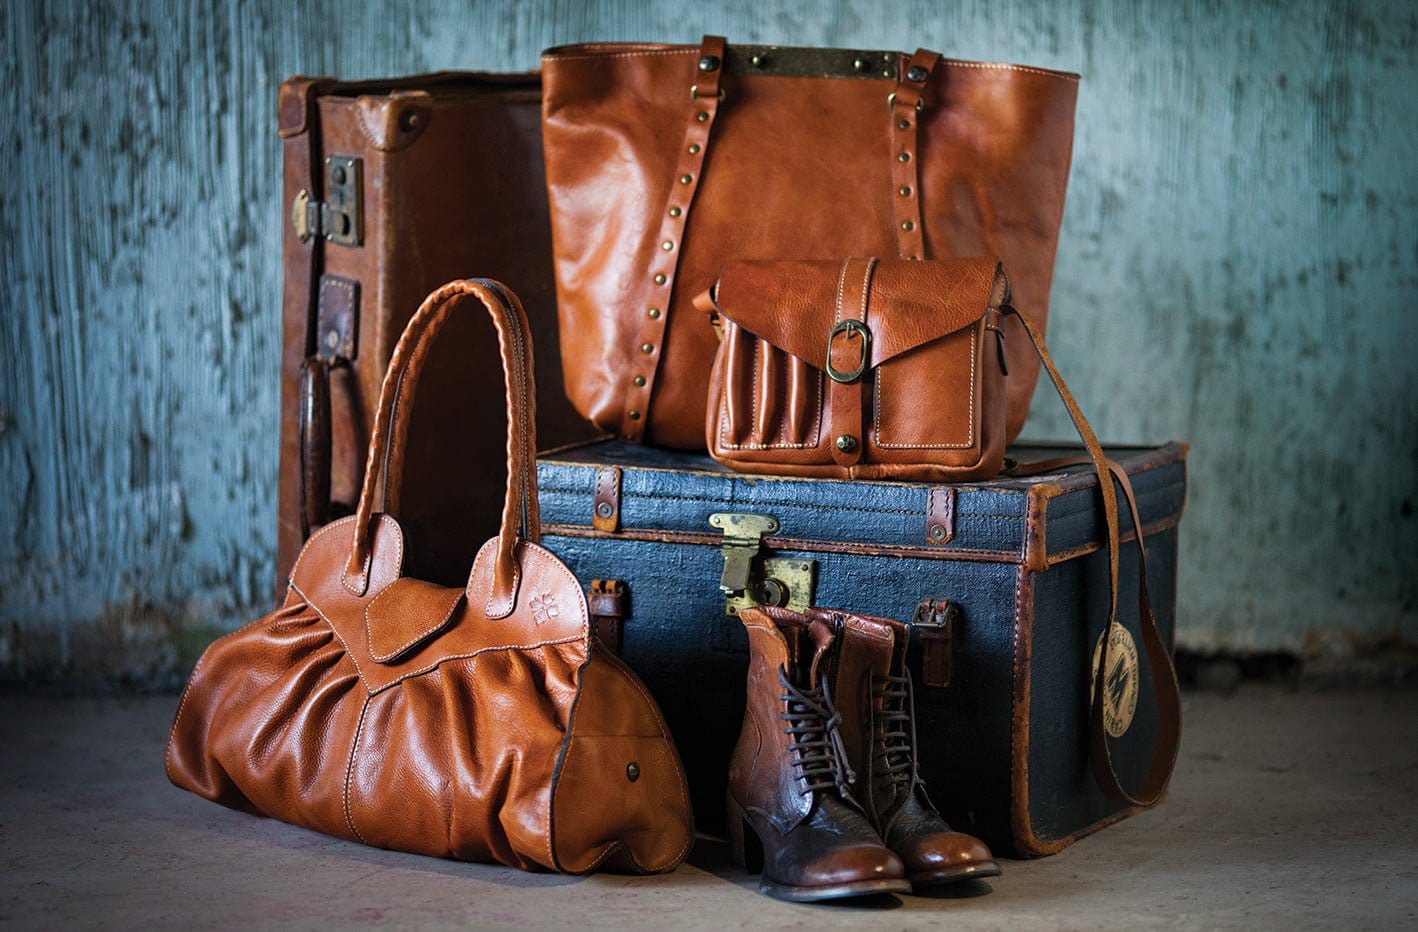 Patricia Nash bags are crafted from high-quality full-grained vegetable tanned leathers